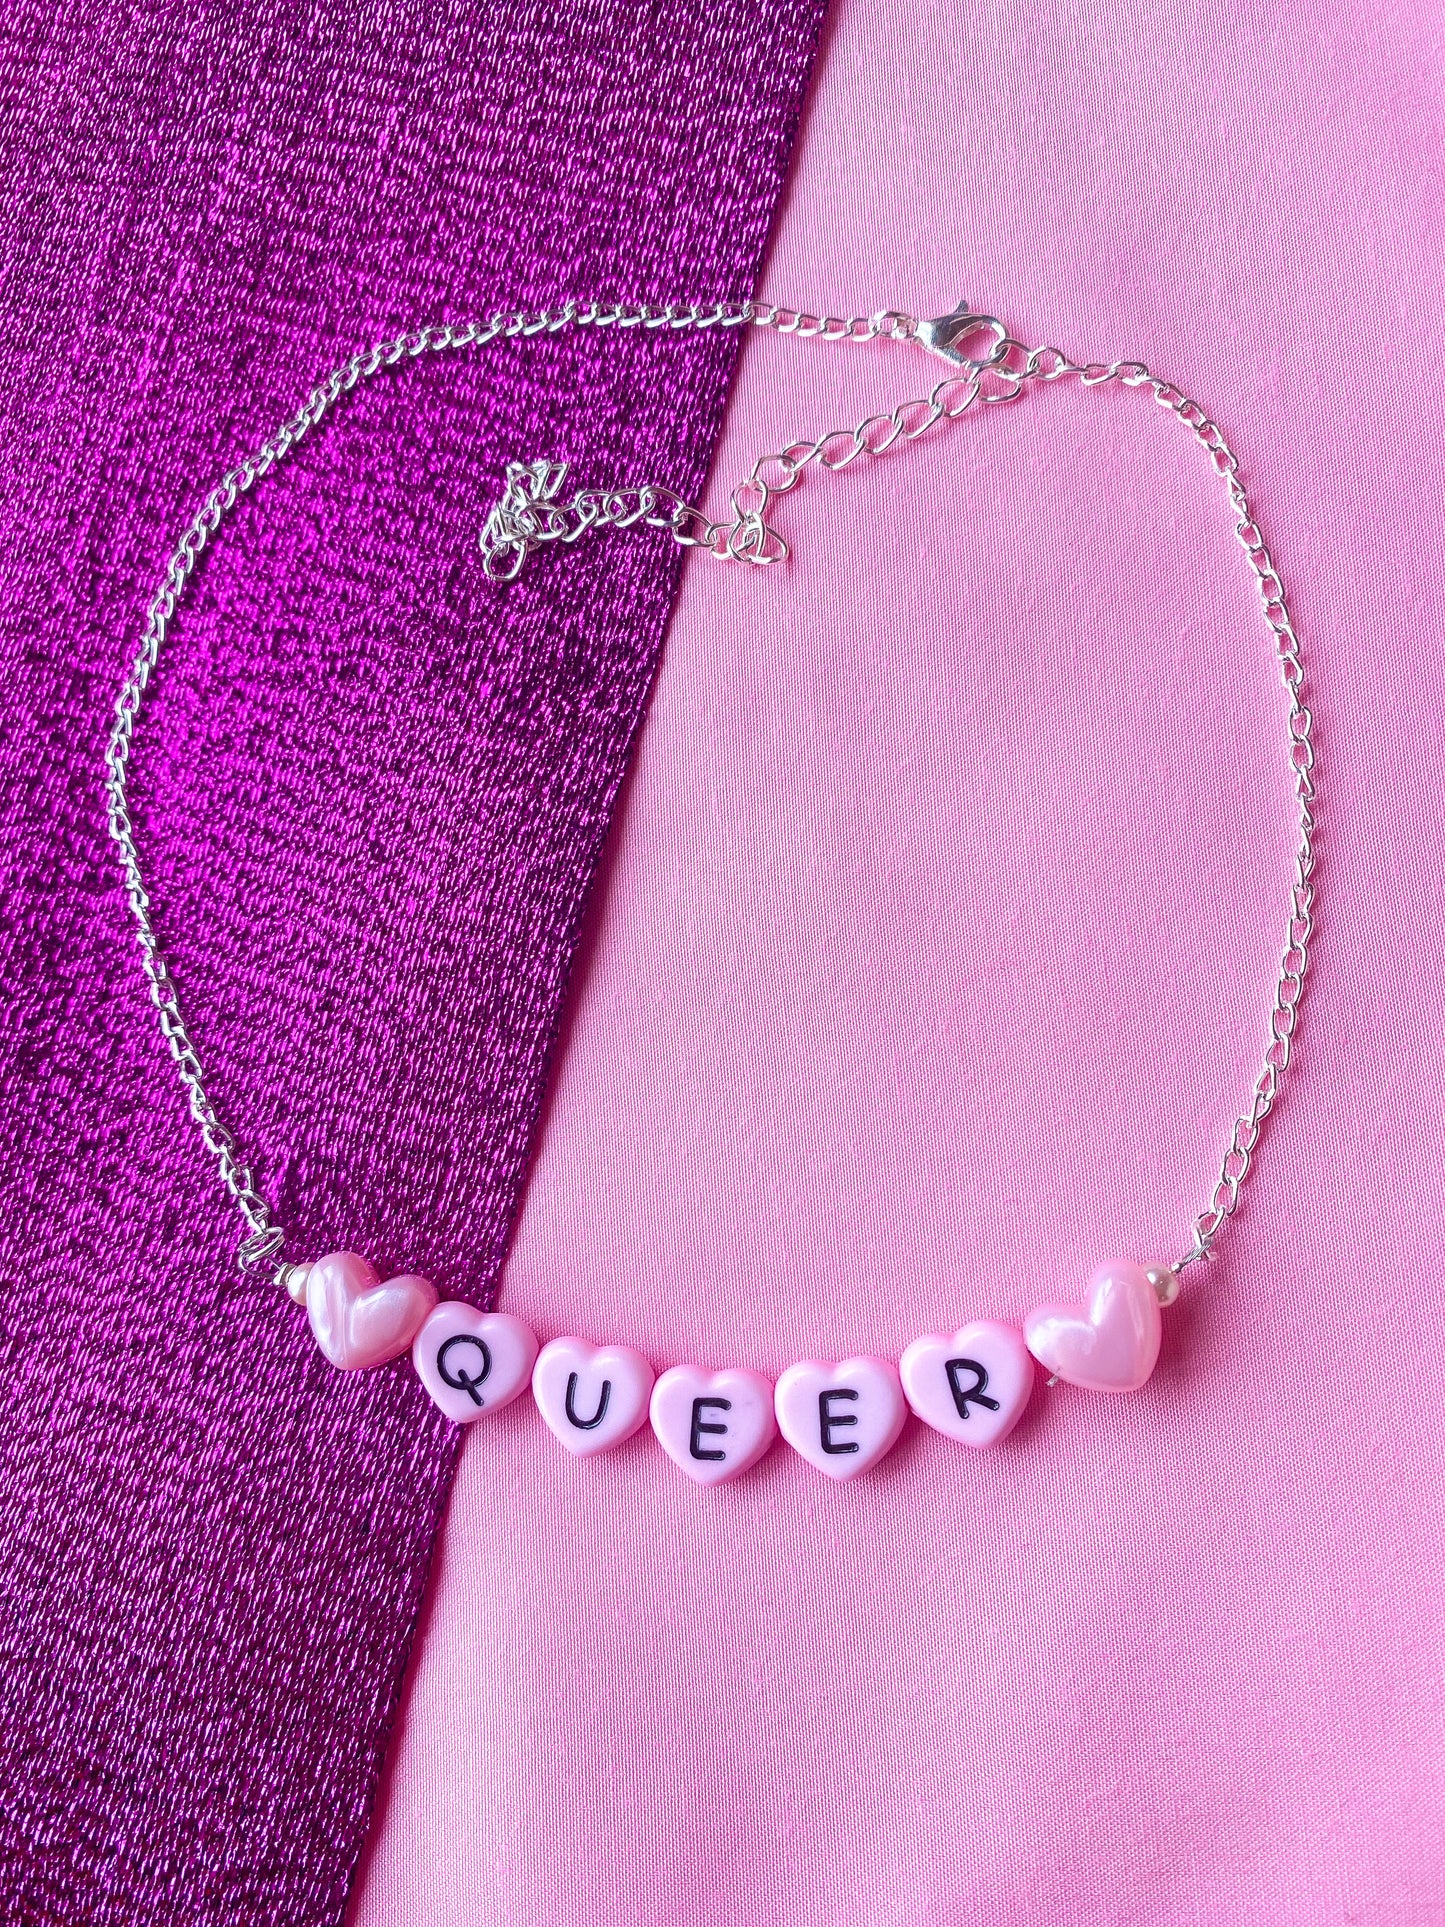 Pink Queer love heart letter bead necklace